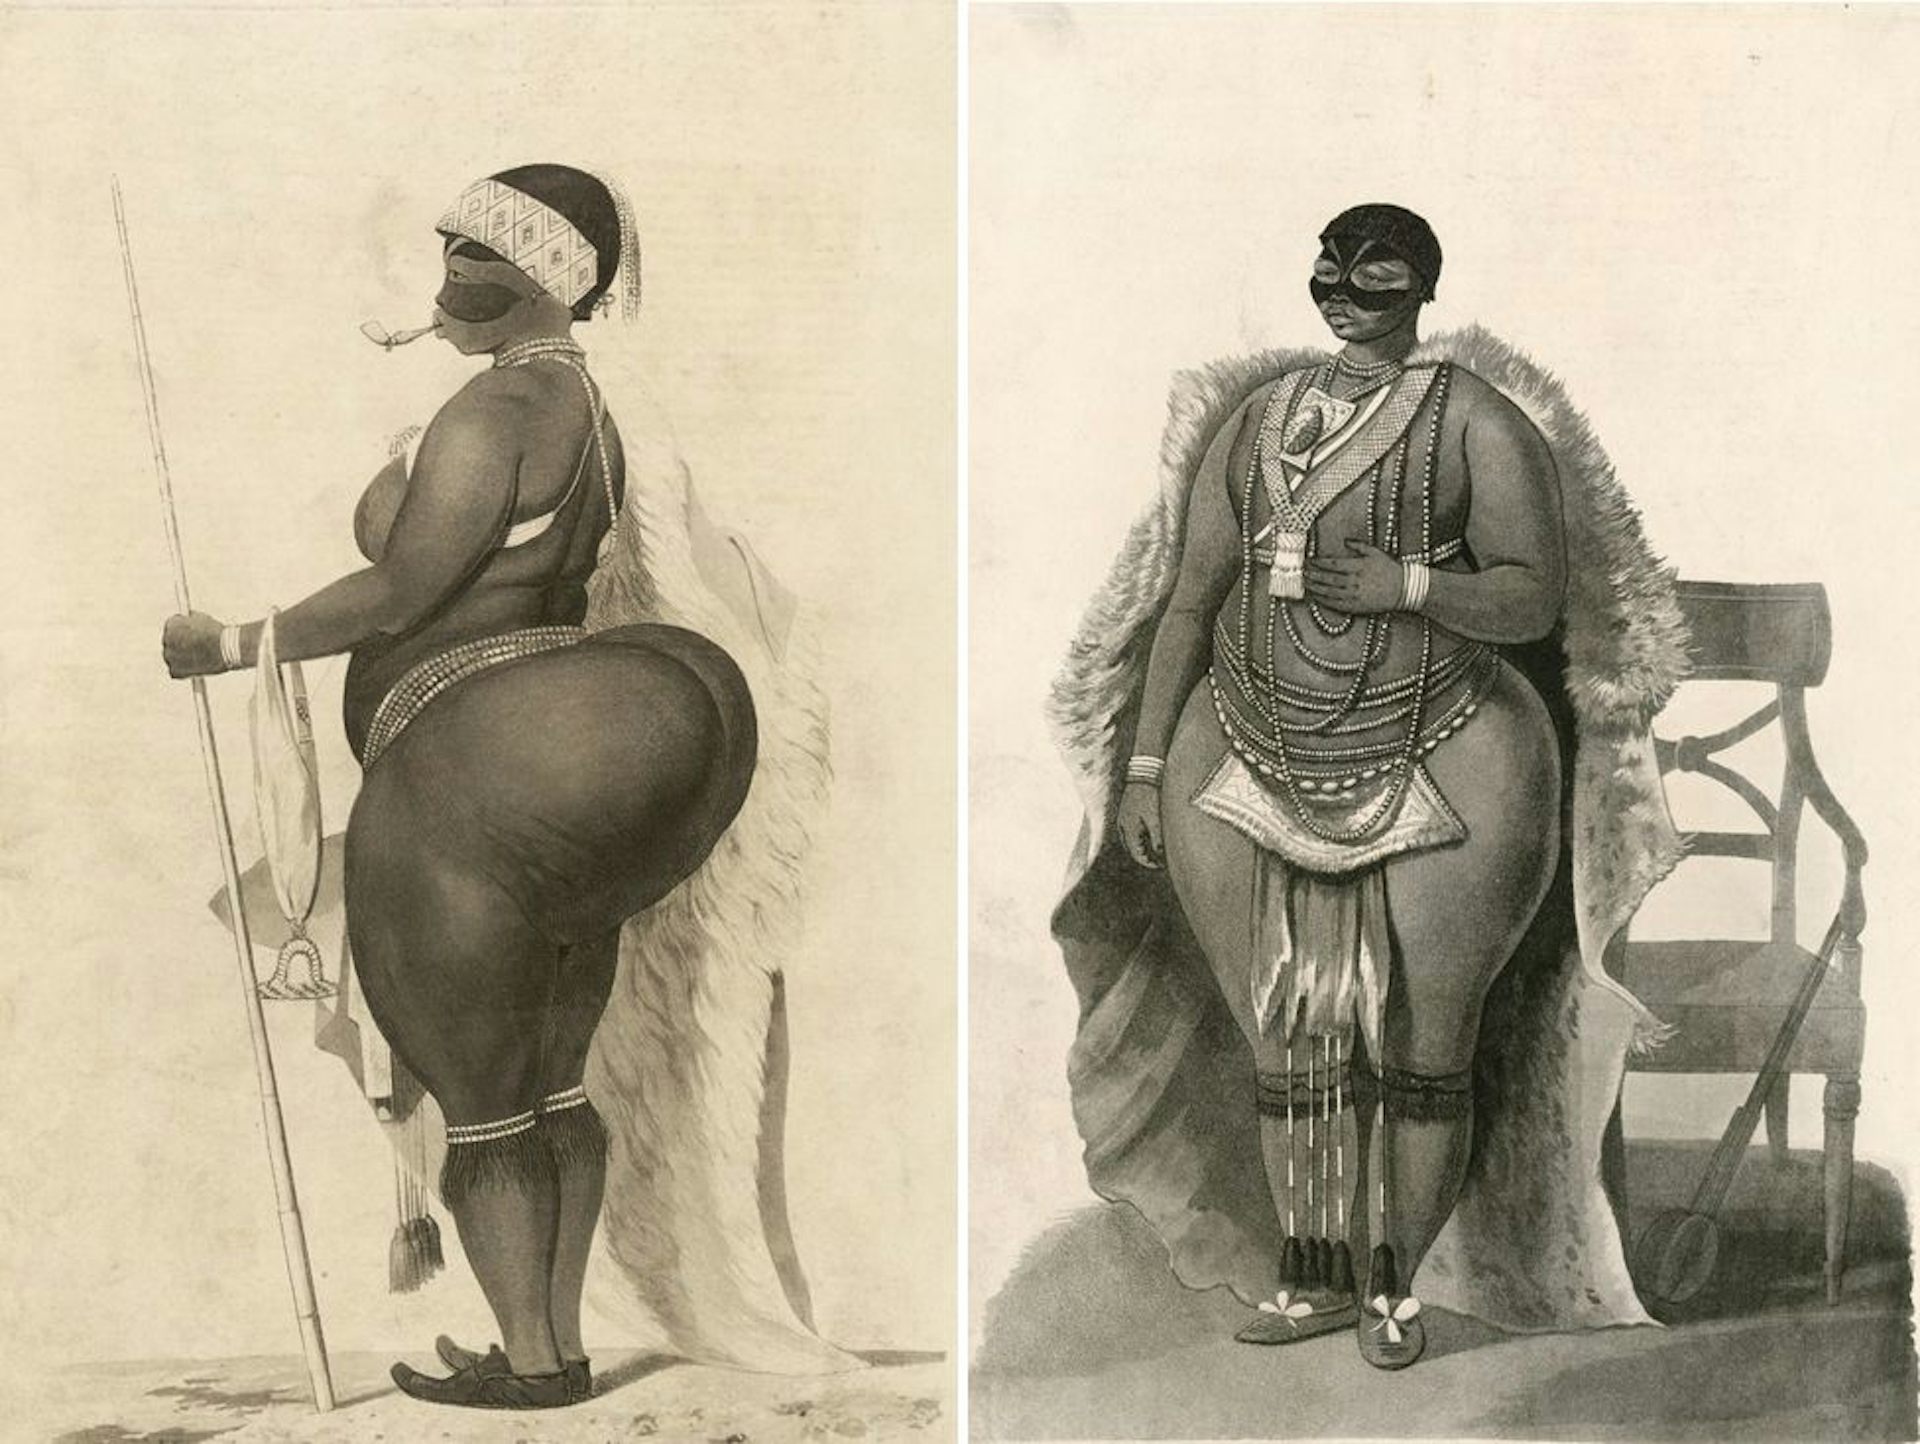 How Sarah Baartmans hips went from a symbol of exploitation to a source of empowerment for Black women picture